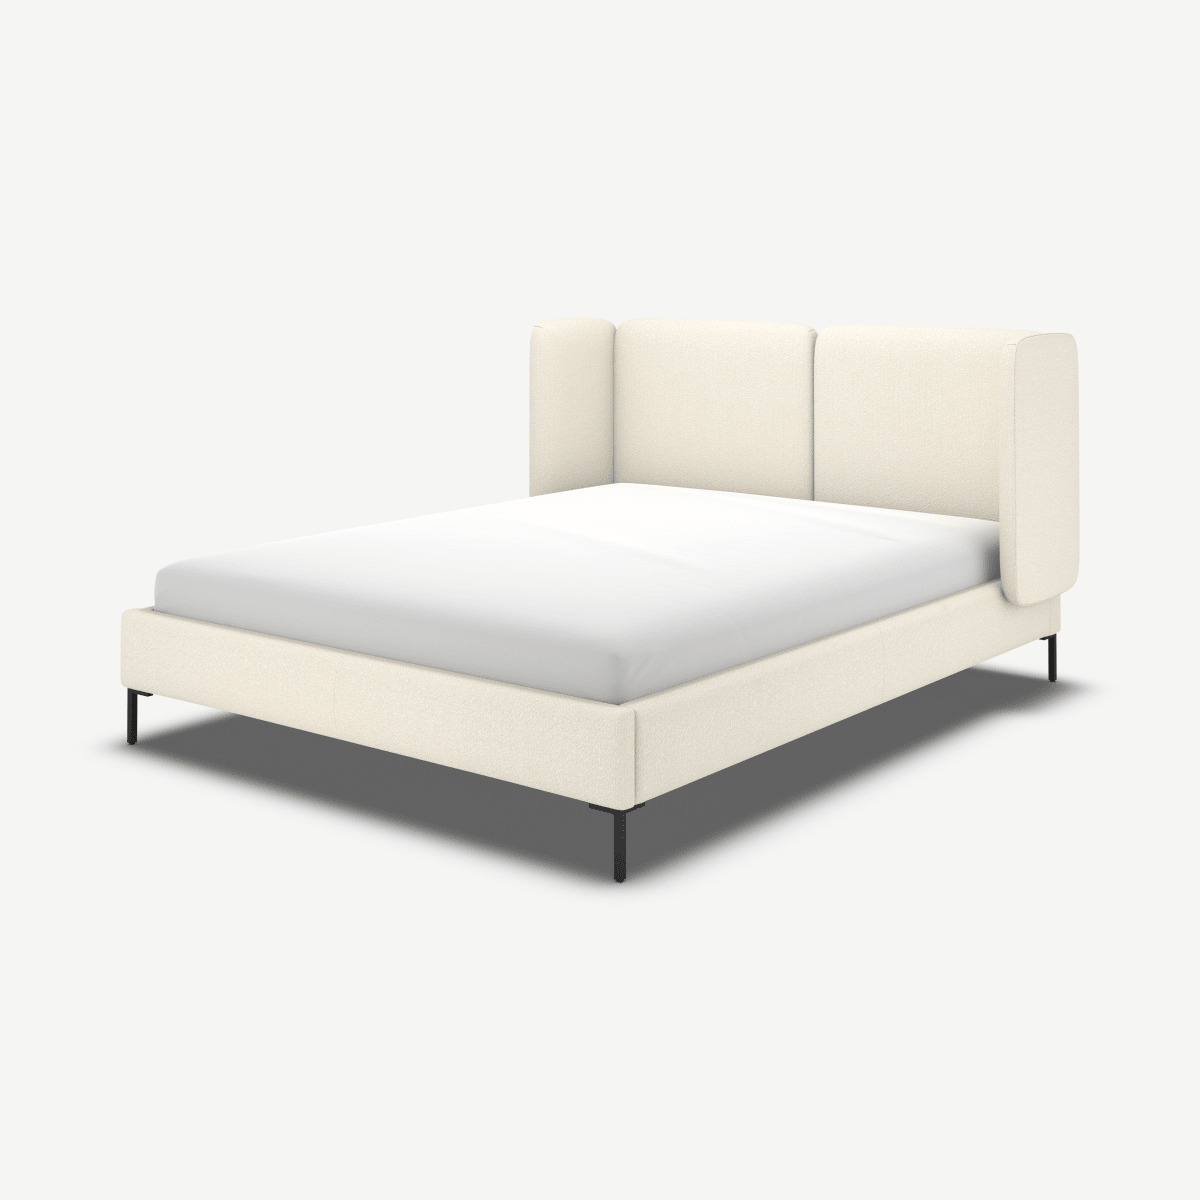 Romola Double Bed, Ivory White Boucle with Black Legs